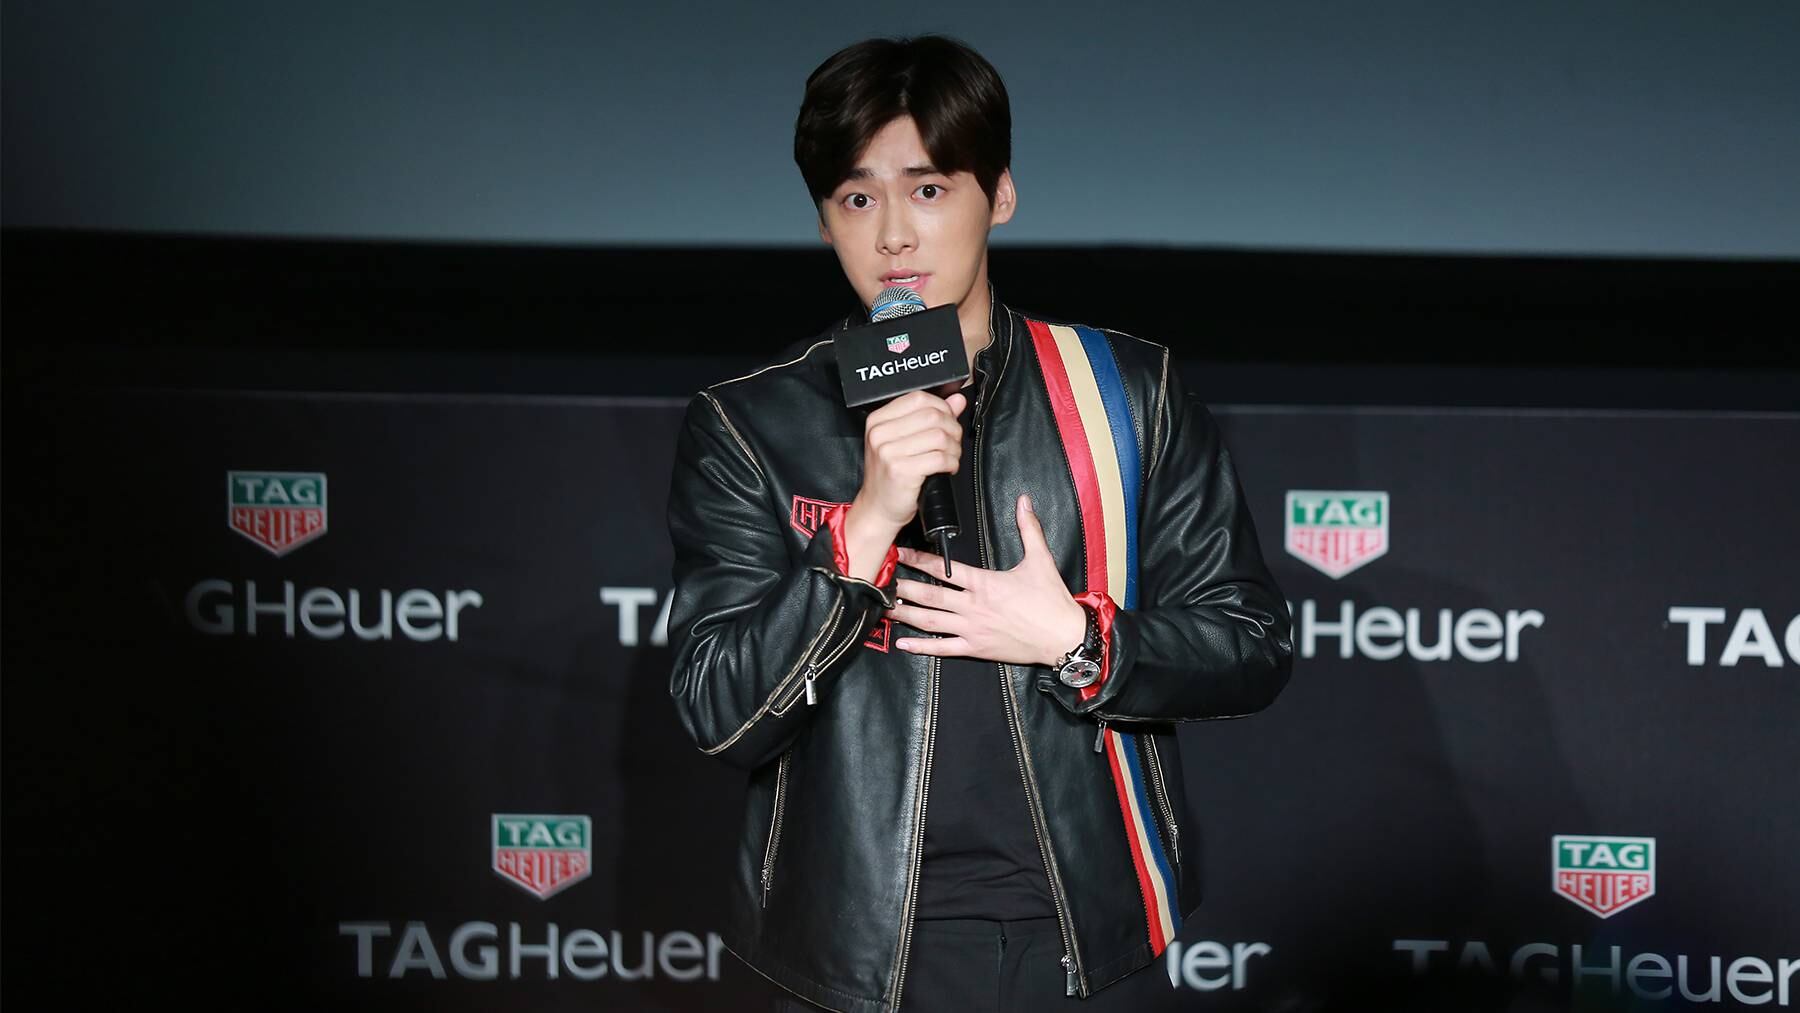 Actor Li Yifeng attends press conference for spokesman of Swiss watch Tag Heuer at Grand Gateway on July 1, 2015 in Shanghai, China. Getty Images.